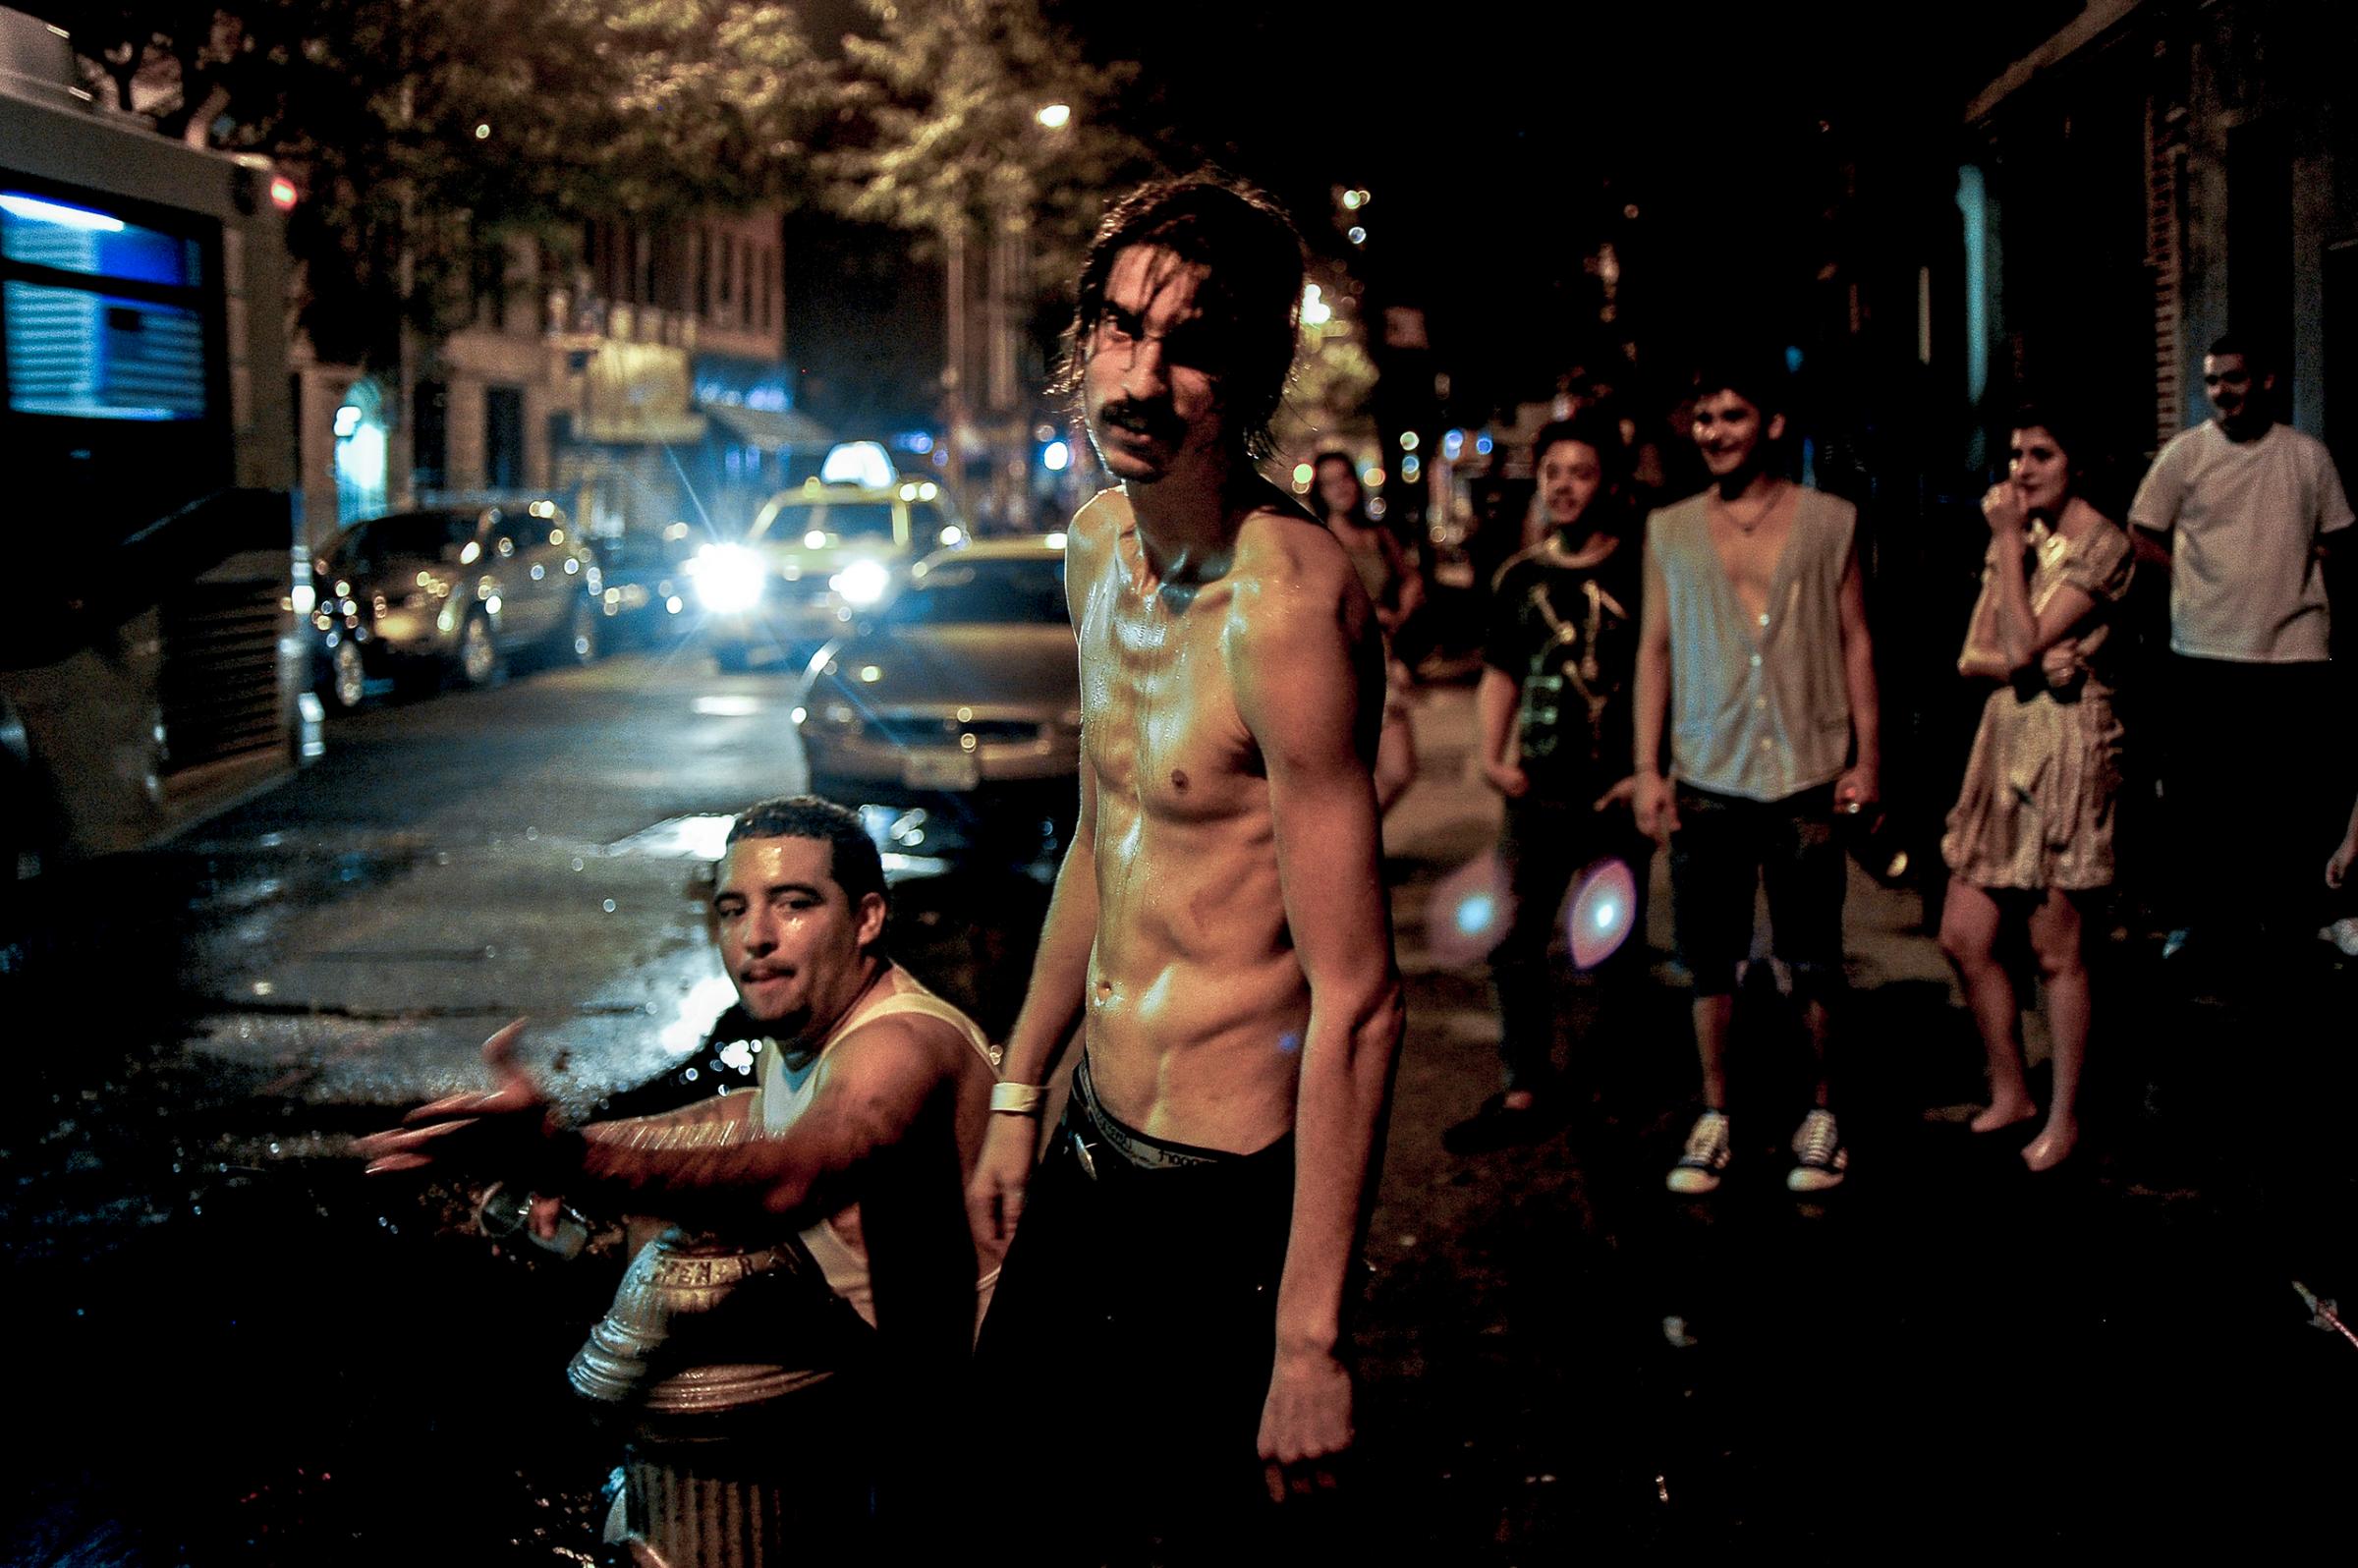 USA. Manhattan, New York. 2010. Playing in a busted fire hydrant on the 4th of July.